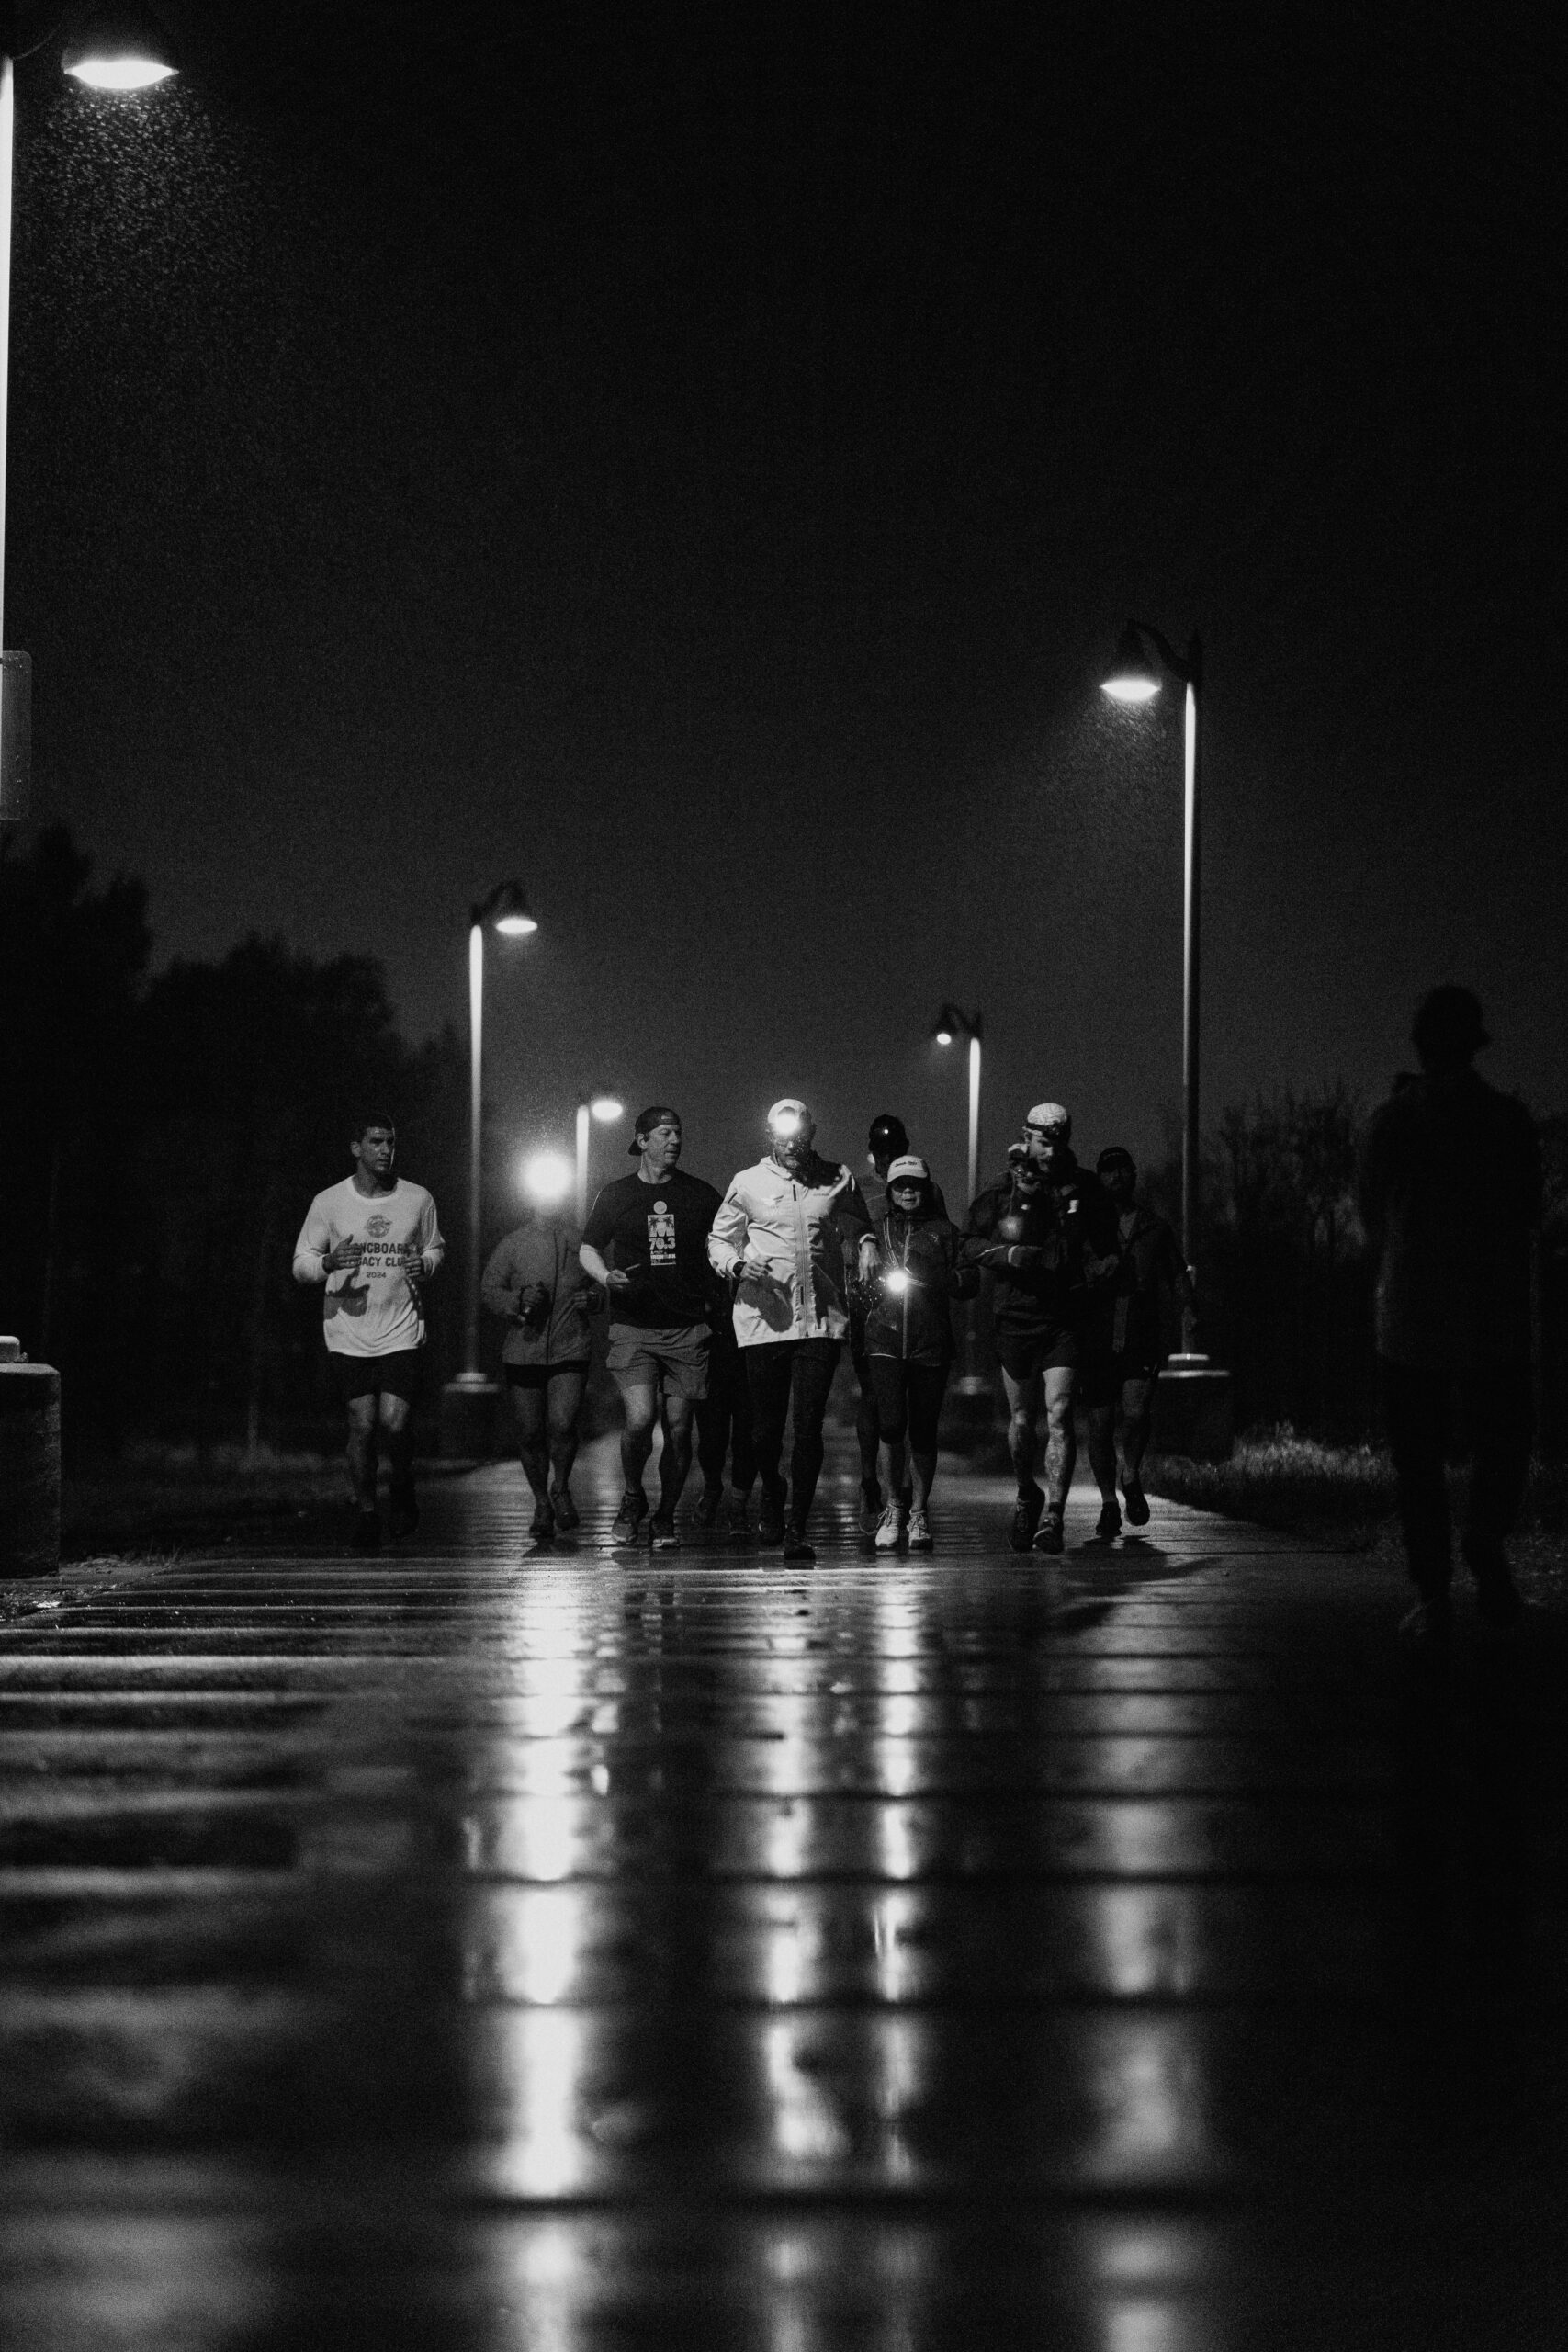 Paul Johnson running with a group at night during his transcontinental run.